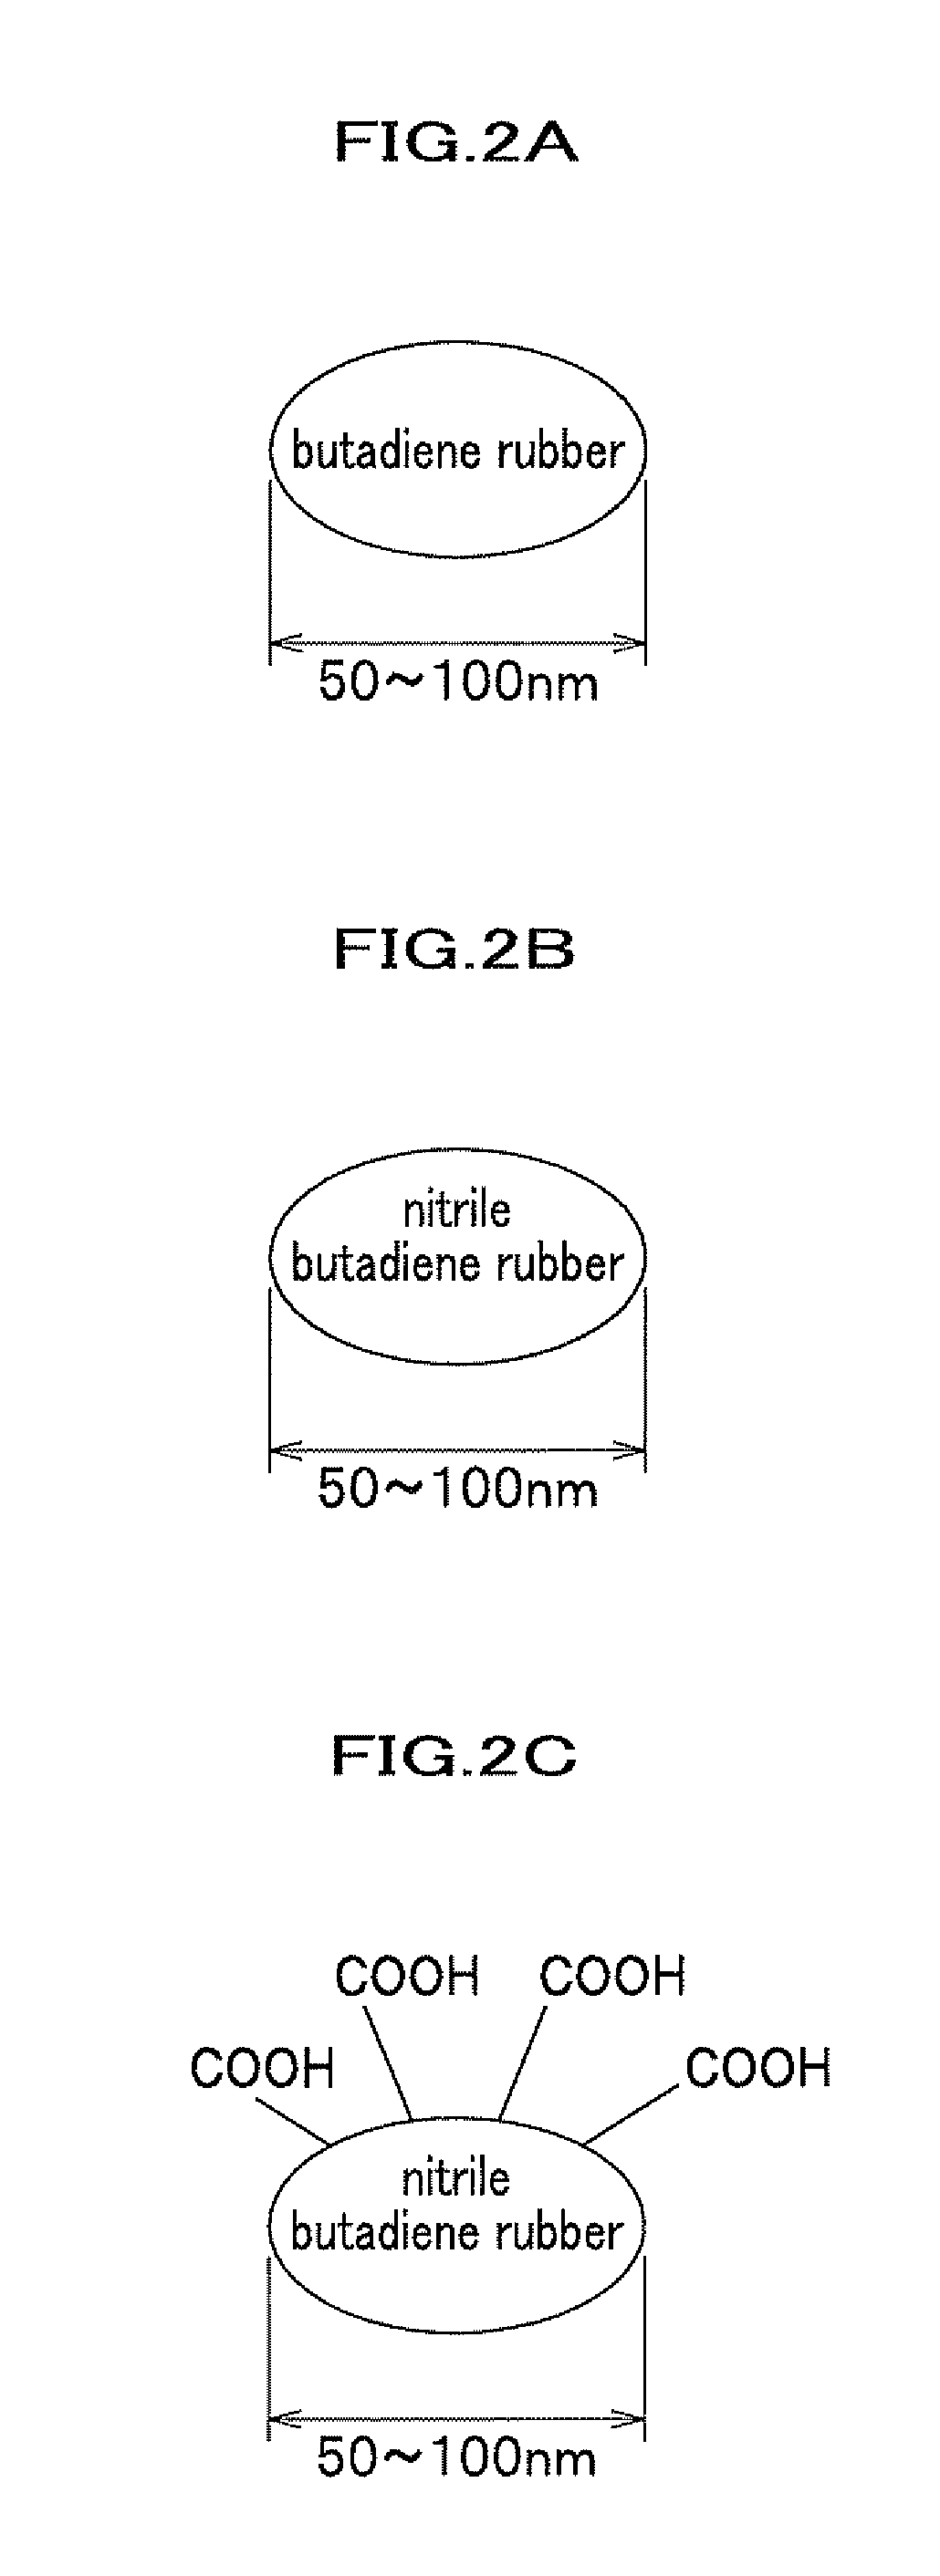 Cast insulation resin for electric apparatus and high voltage electric apparatus using the same